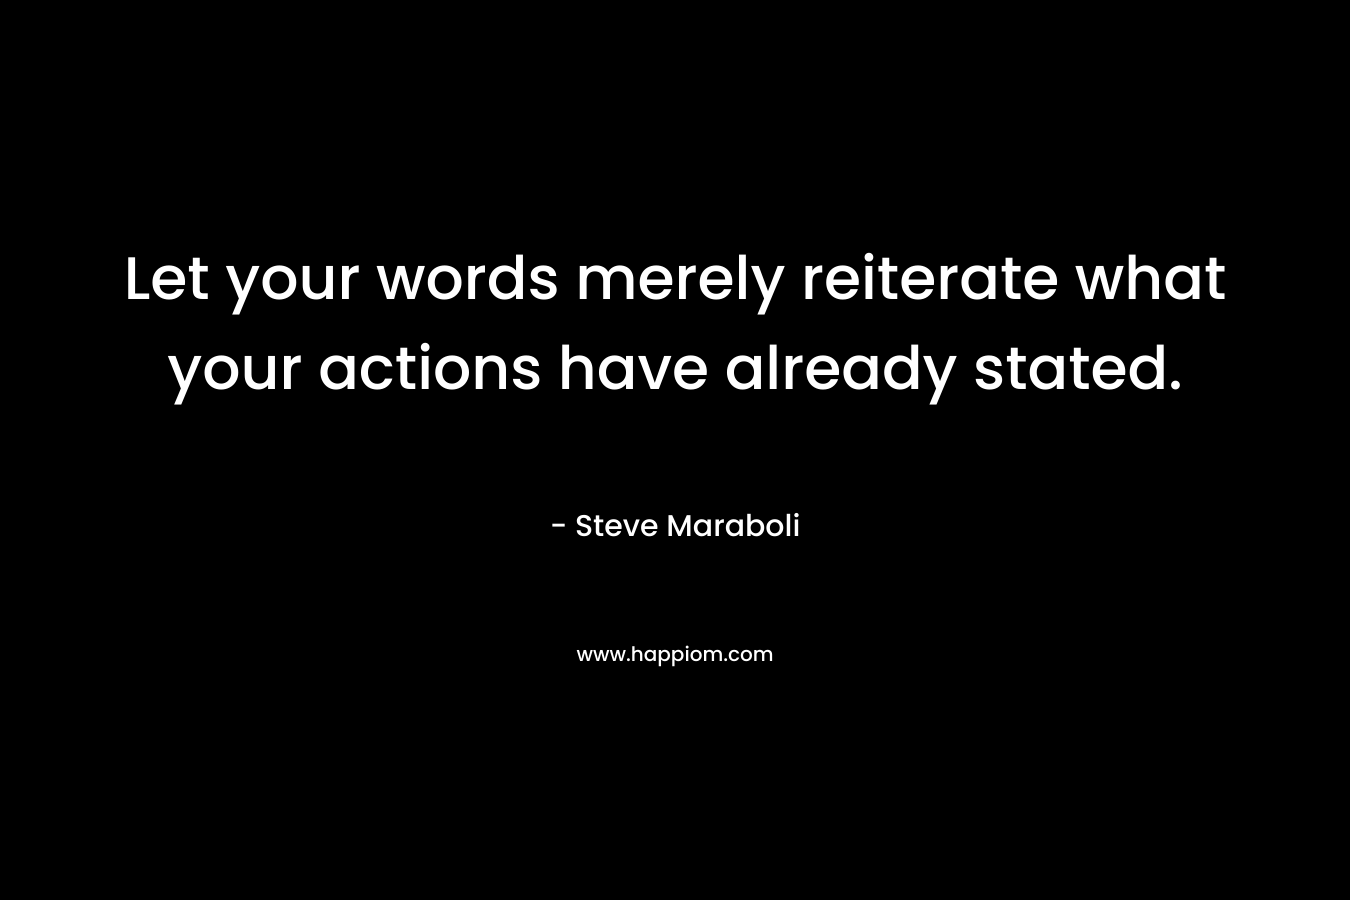 Let your words merely reiterate what your actions have already stated.